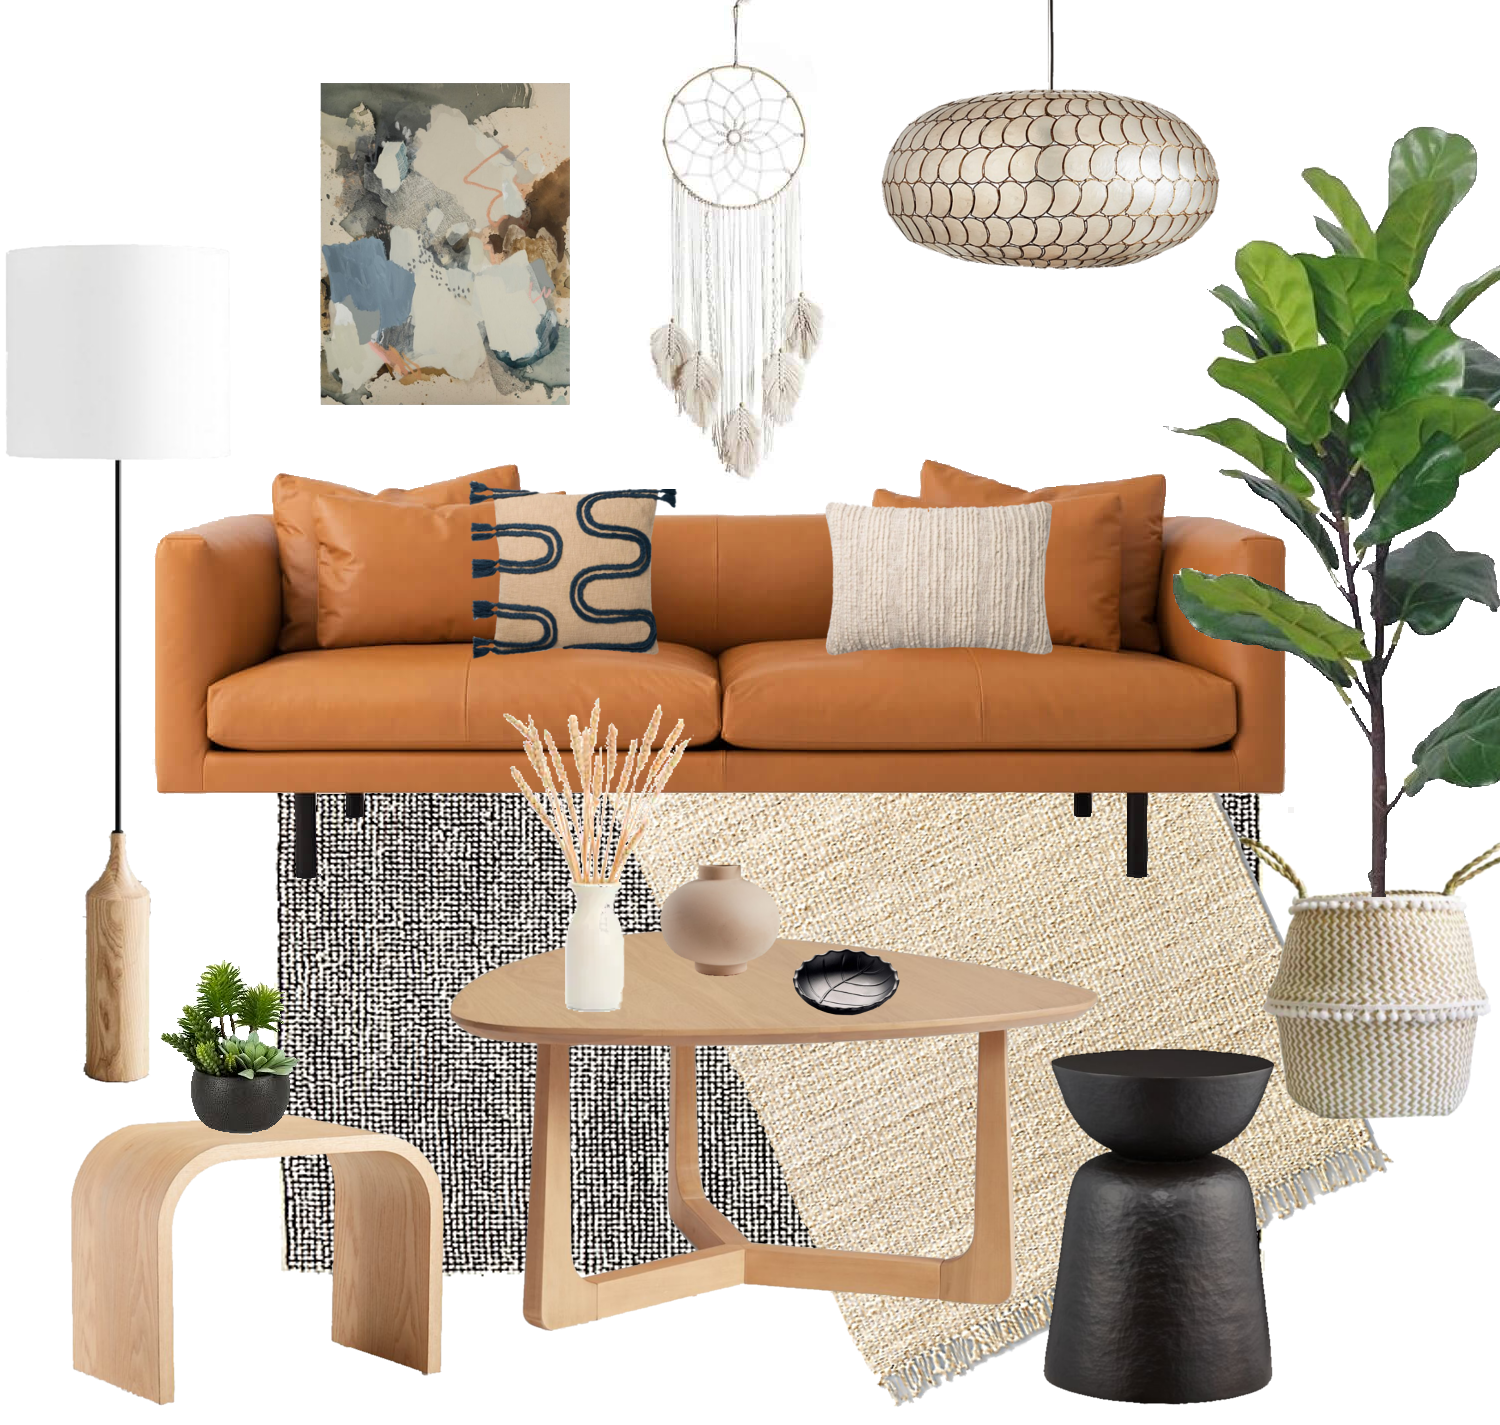 Urban Chic Living Room by Sarah-Marie Lackey - Home Trends Magazine